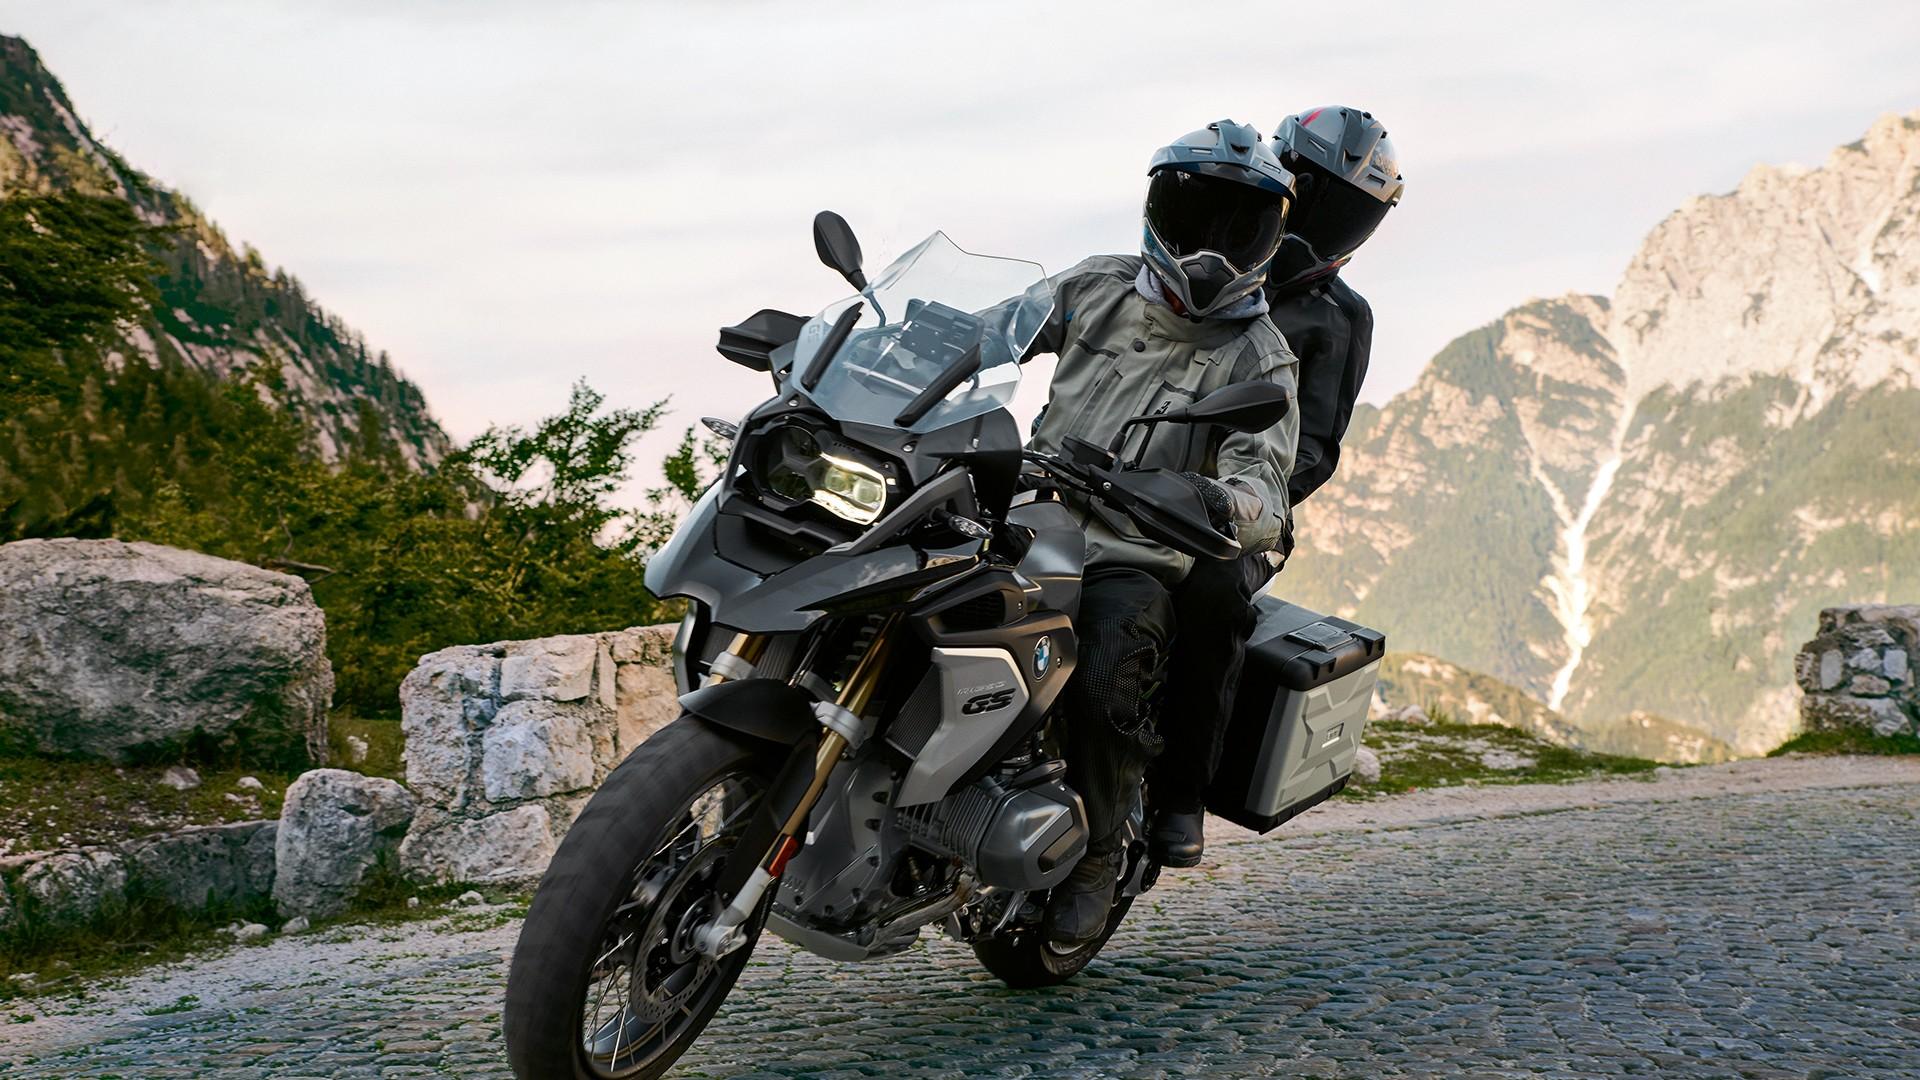 BMW reveals their full specs and performance of R 1250 GS 2019